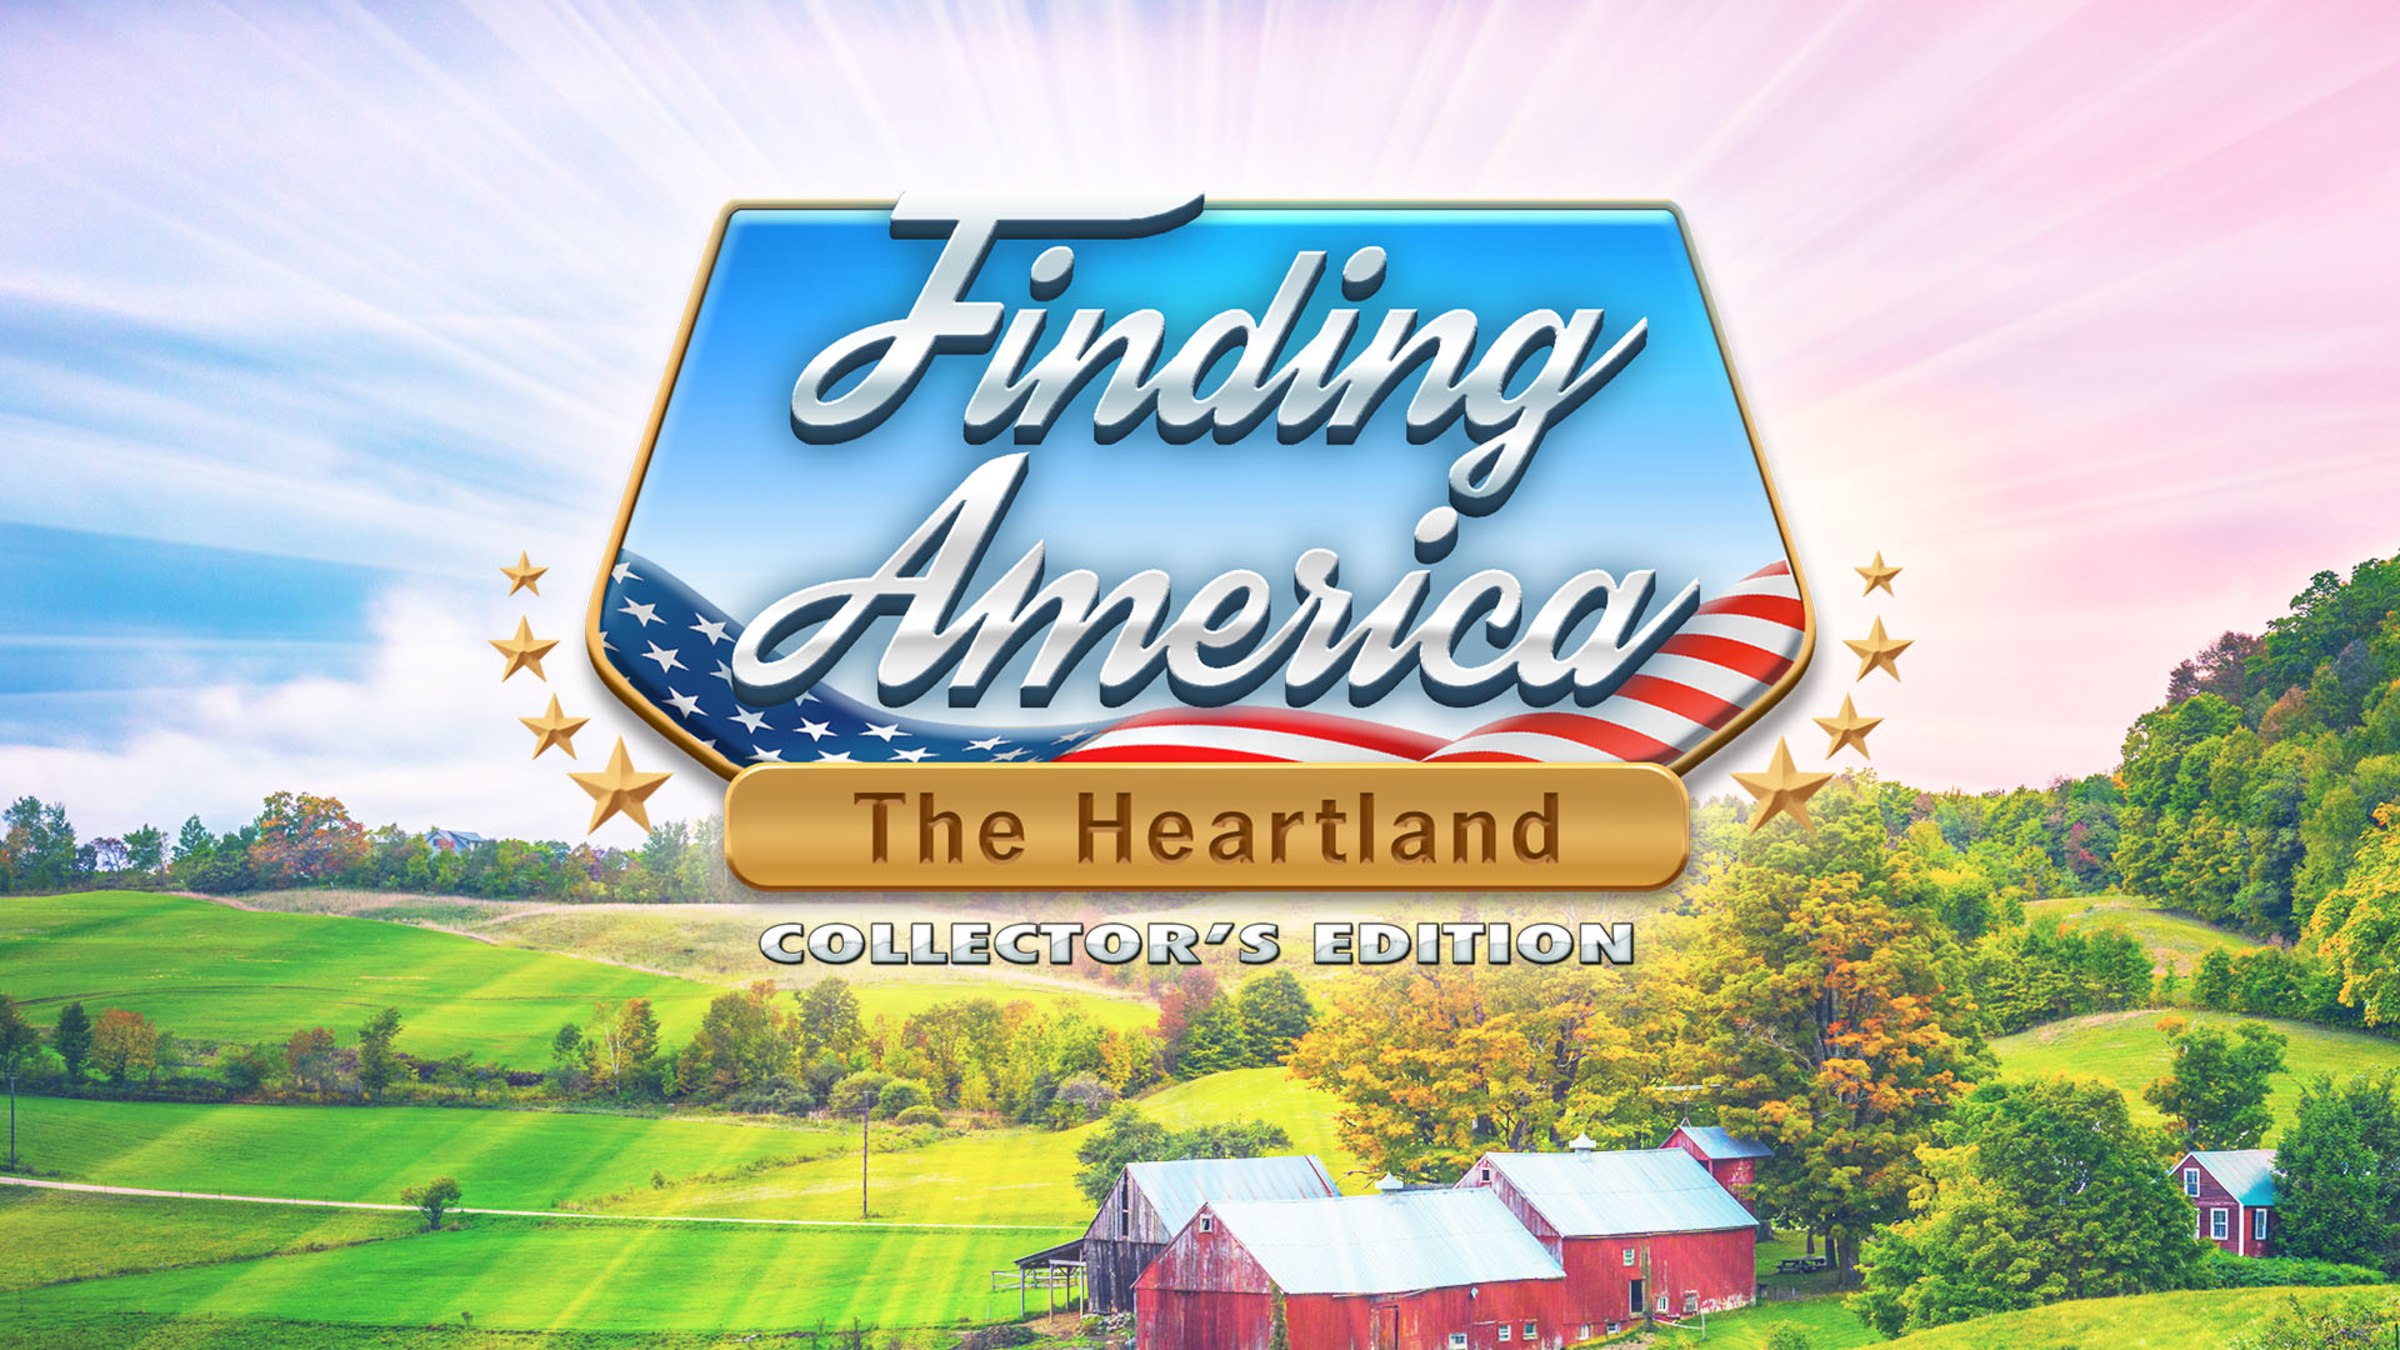 https://assets.nintendo.com/image/upload/c_fill,w_1200/q_auto:best/f_auto/dpr_2.0/ncom/en_US/games/switch/f/finding-america-the-heartland-collectors-edition-switch/